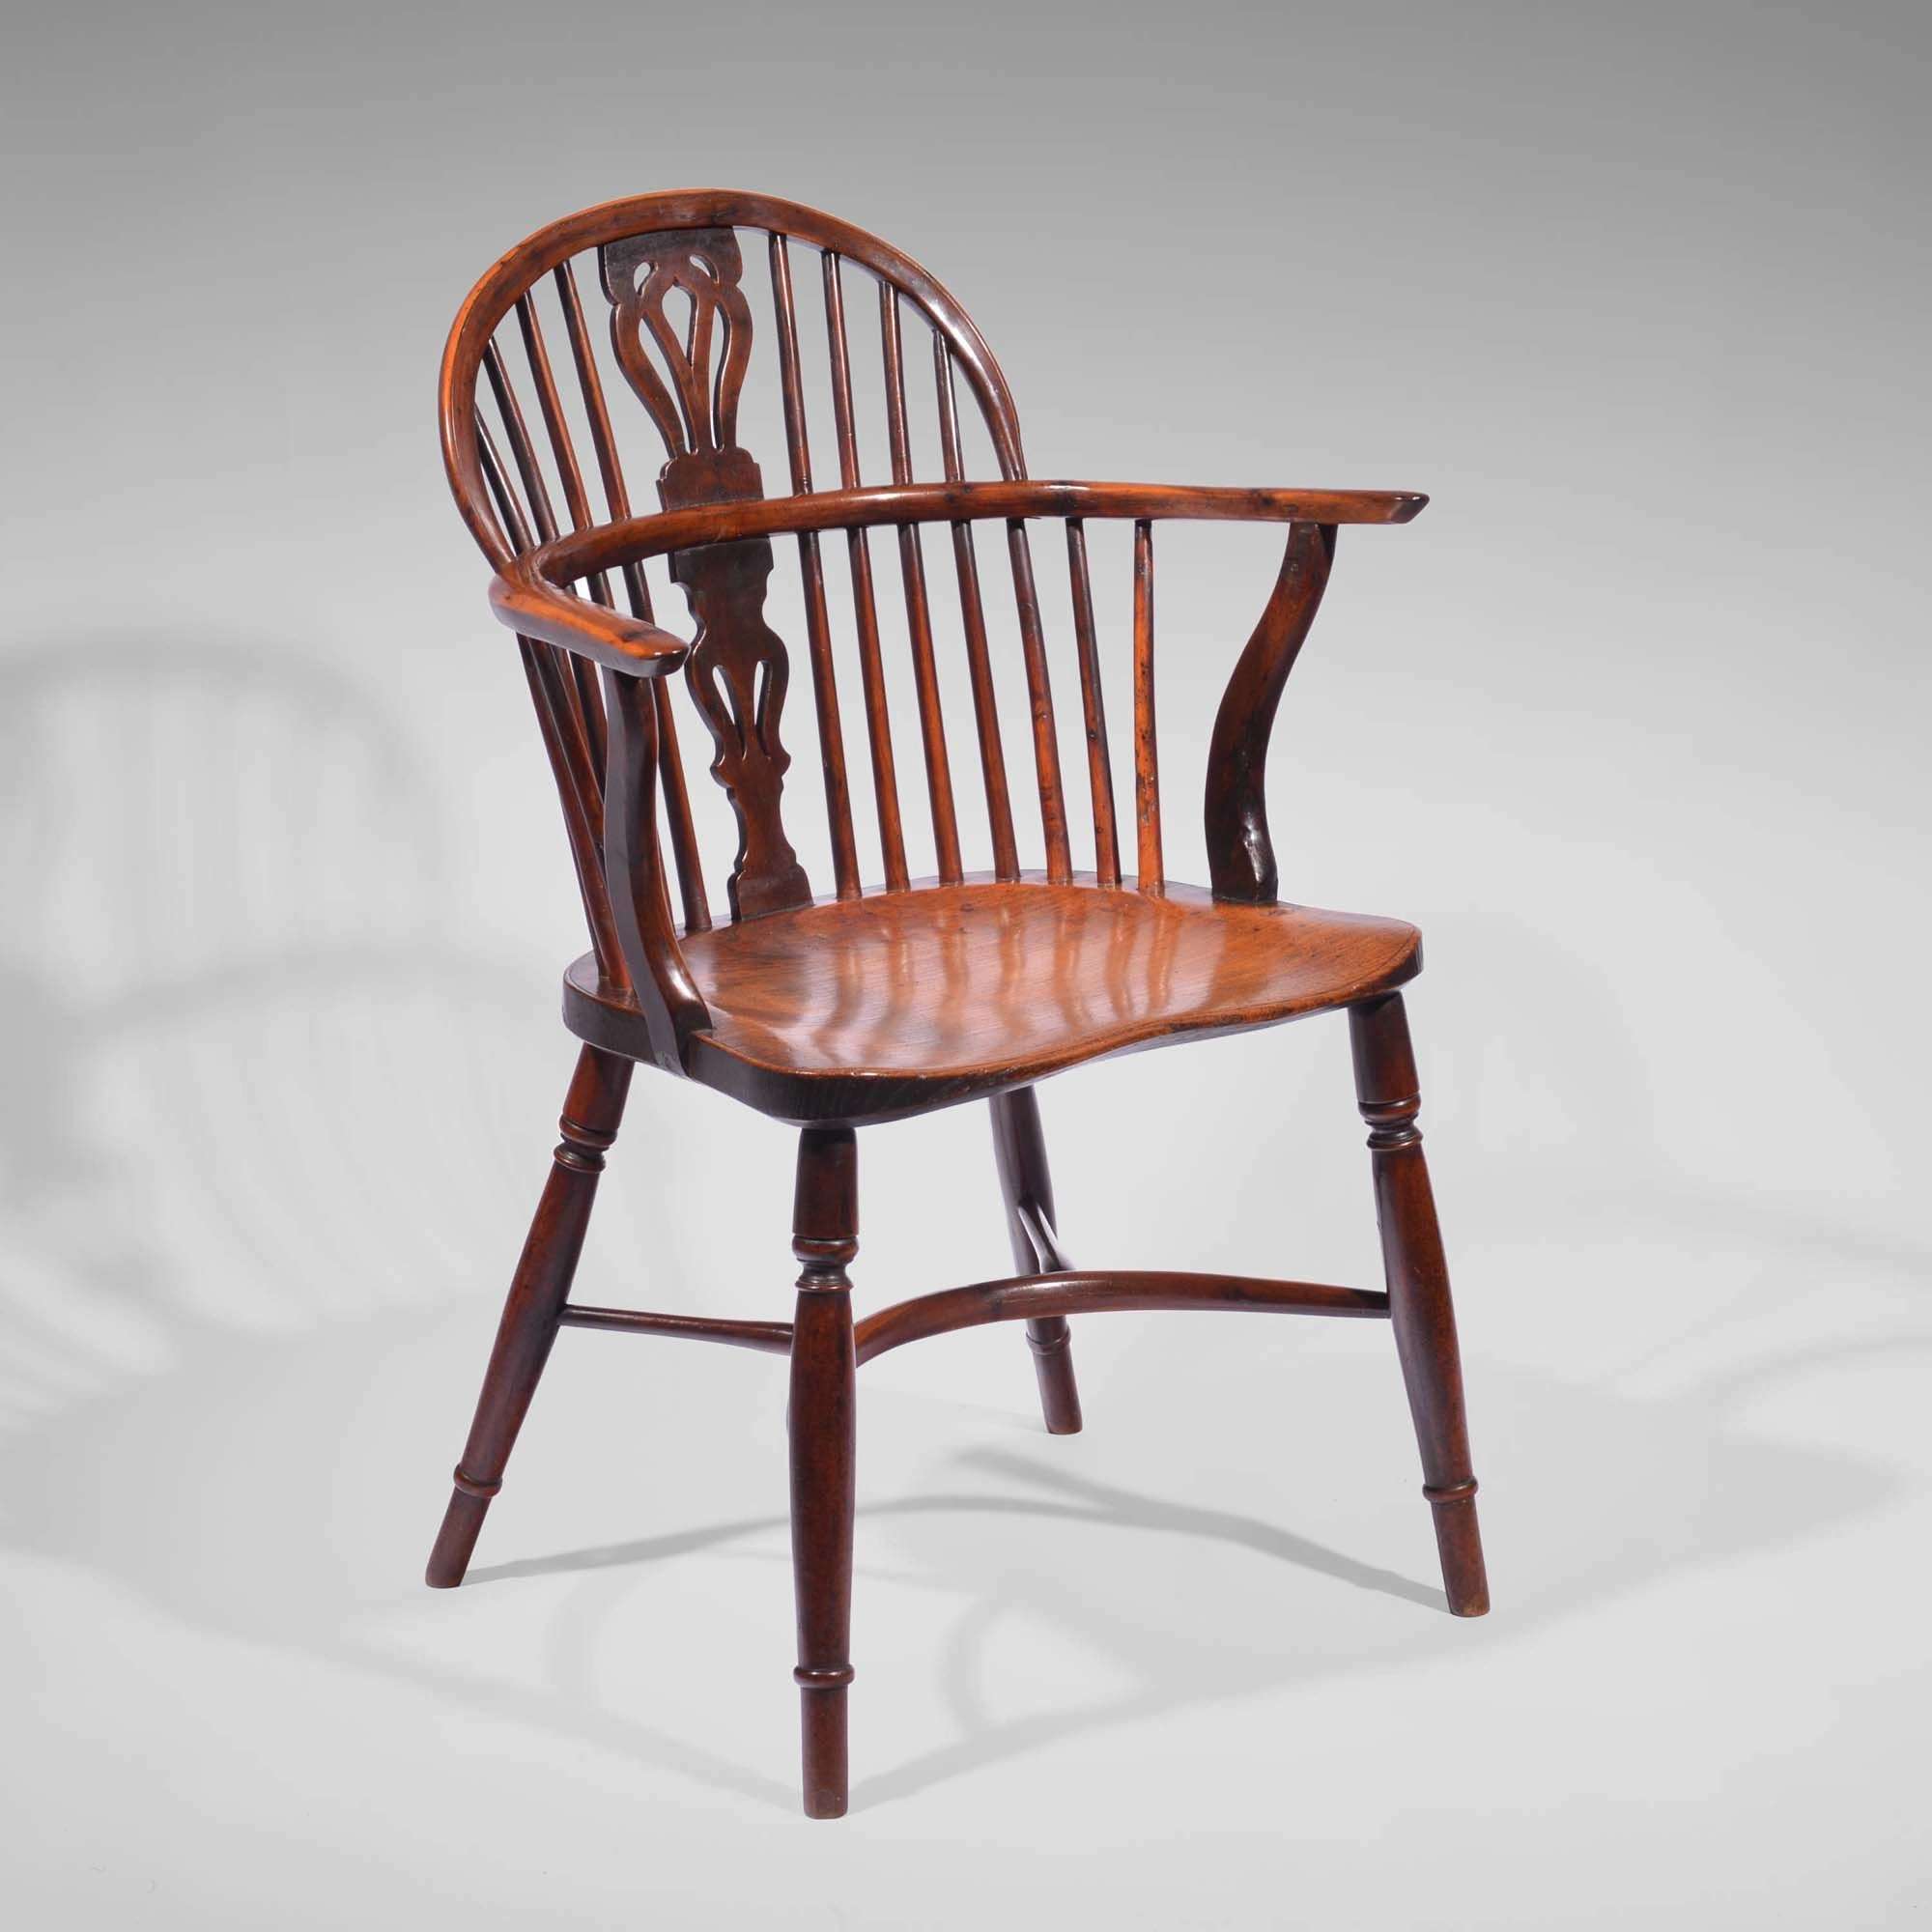 19th century yew lowback Windsor chair